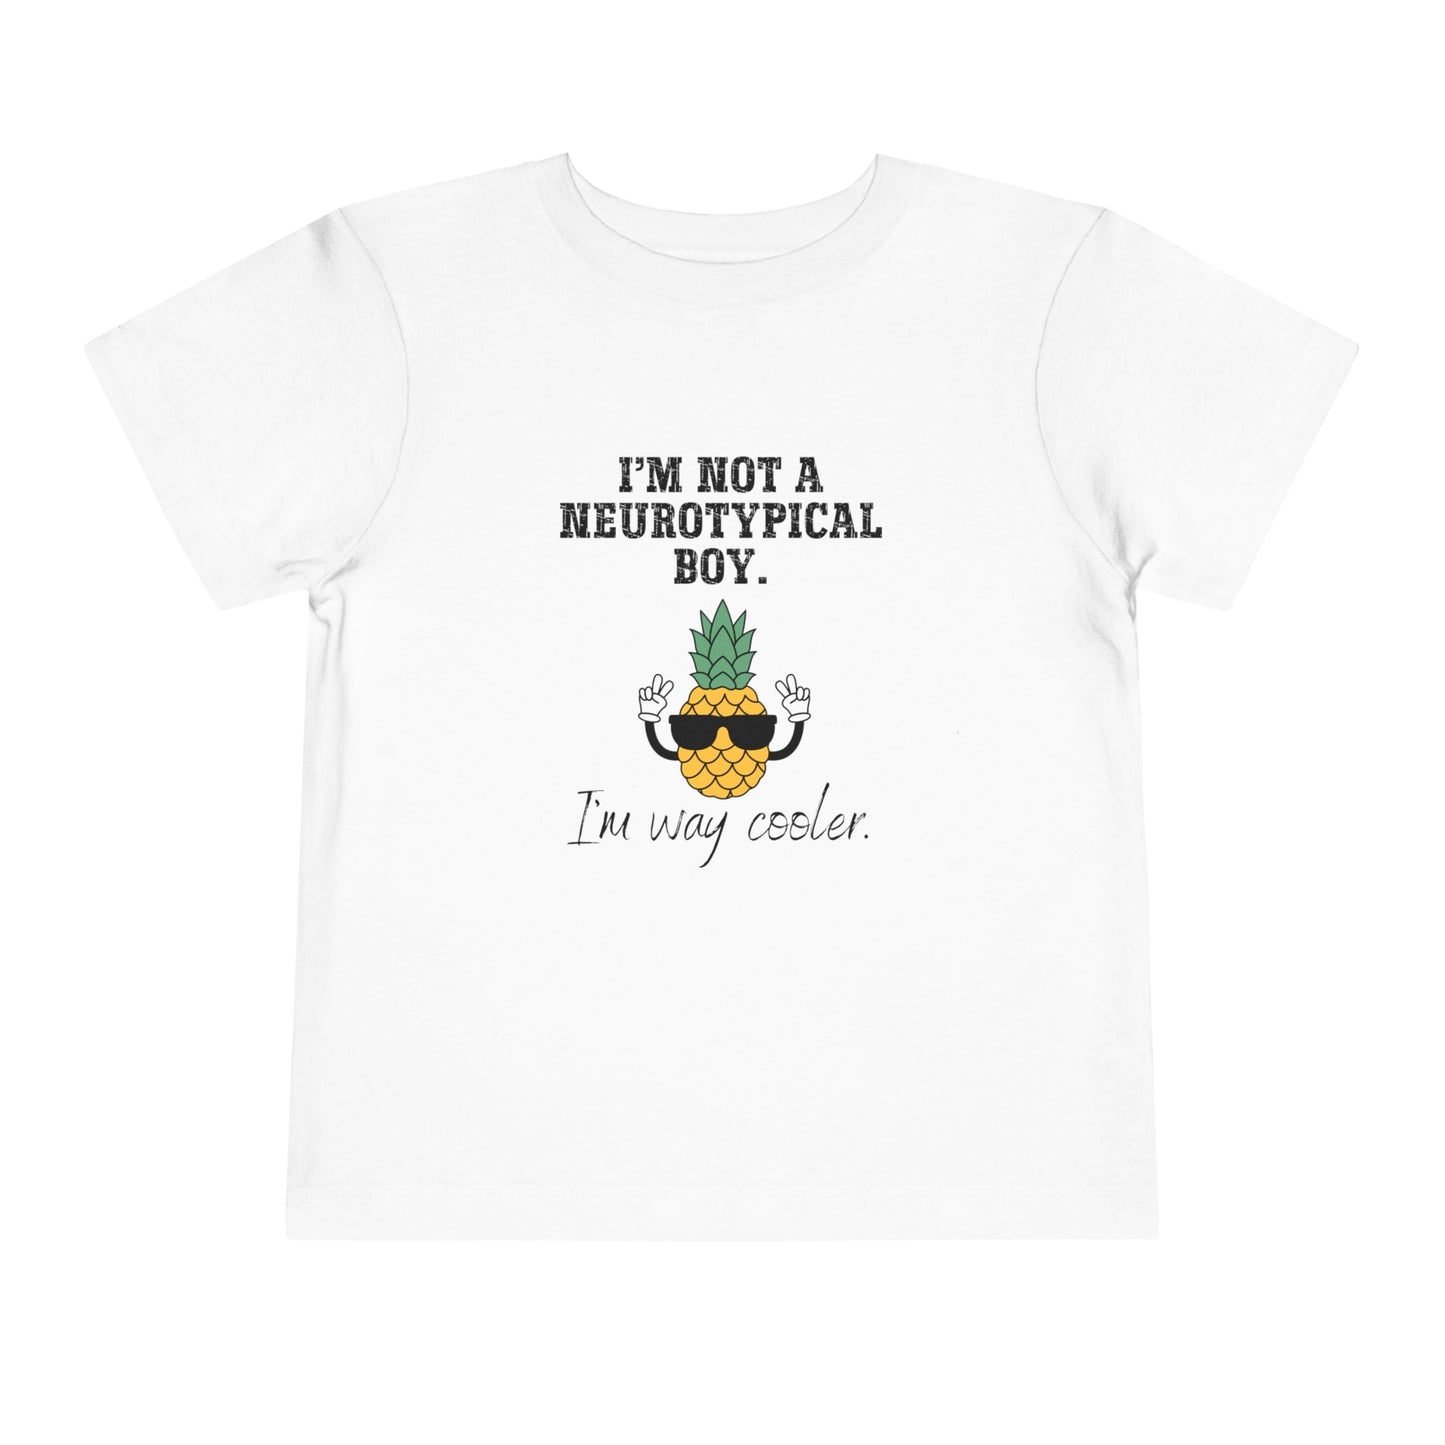 Not a Nuerotypical boy, much cooler Autism Toddler Short Sleeve Tee